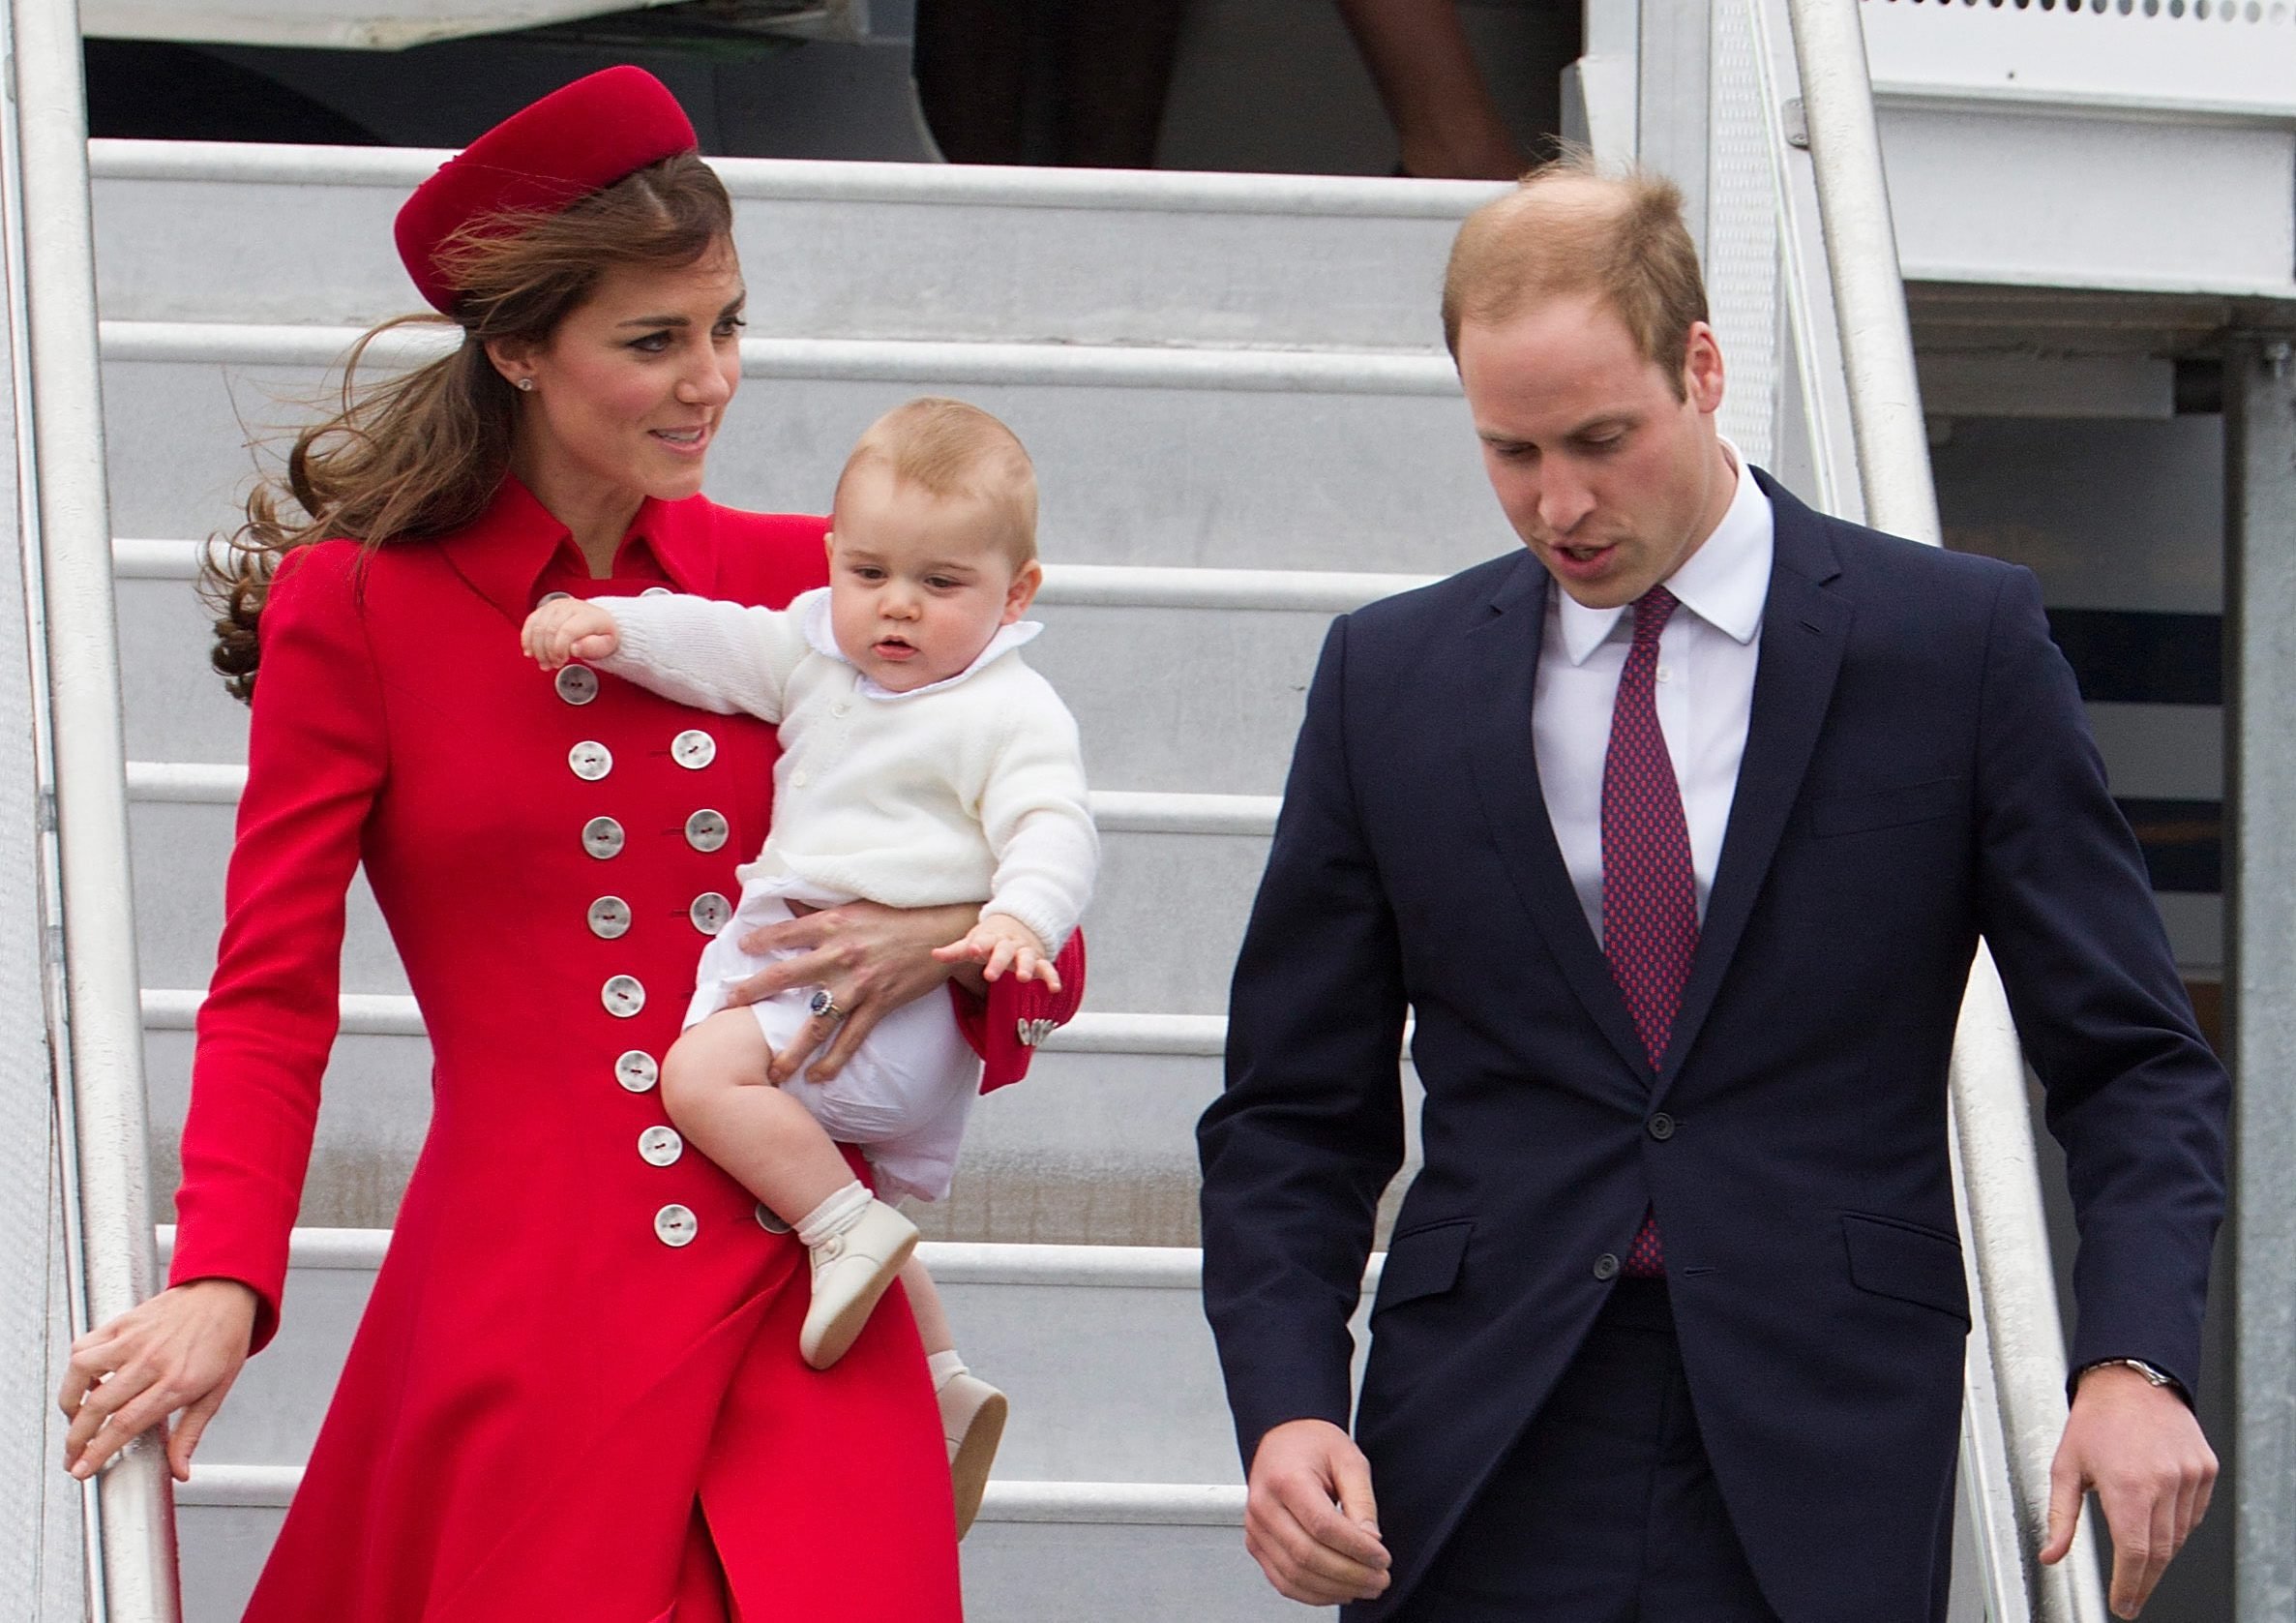 From right: Britain's Prince William, Duke of Cambridge and his wife Catherine, Duchess of Cambridge, carrying baby Prince George, arrive at Wellington Military Terminal, in Wellington, New Zealand, on April 7, 2014.